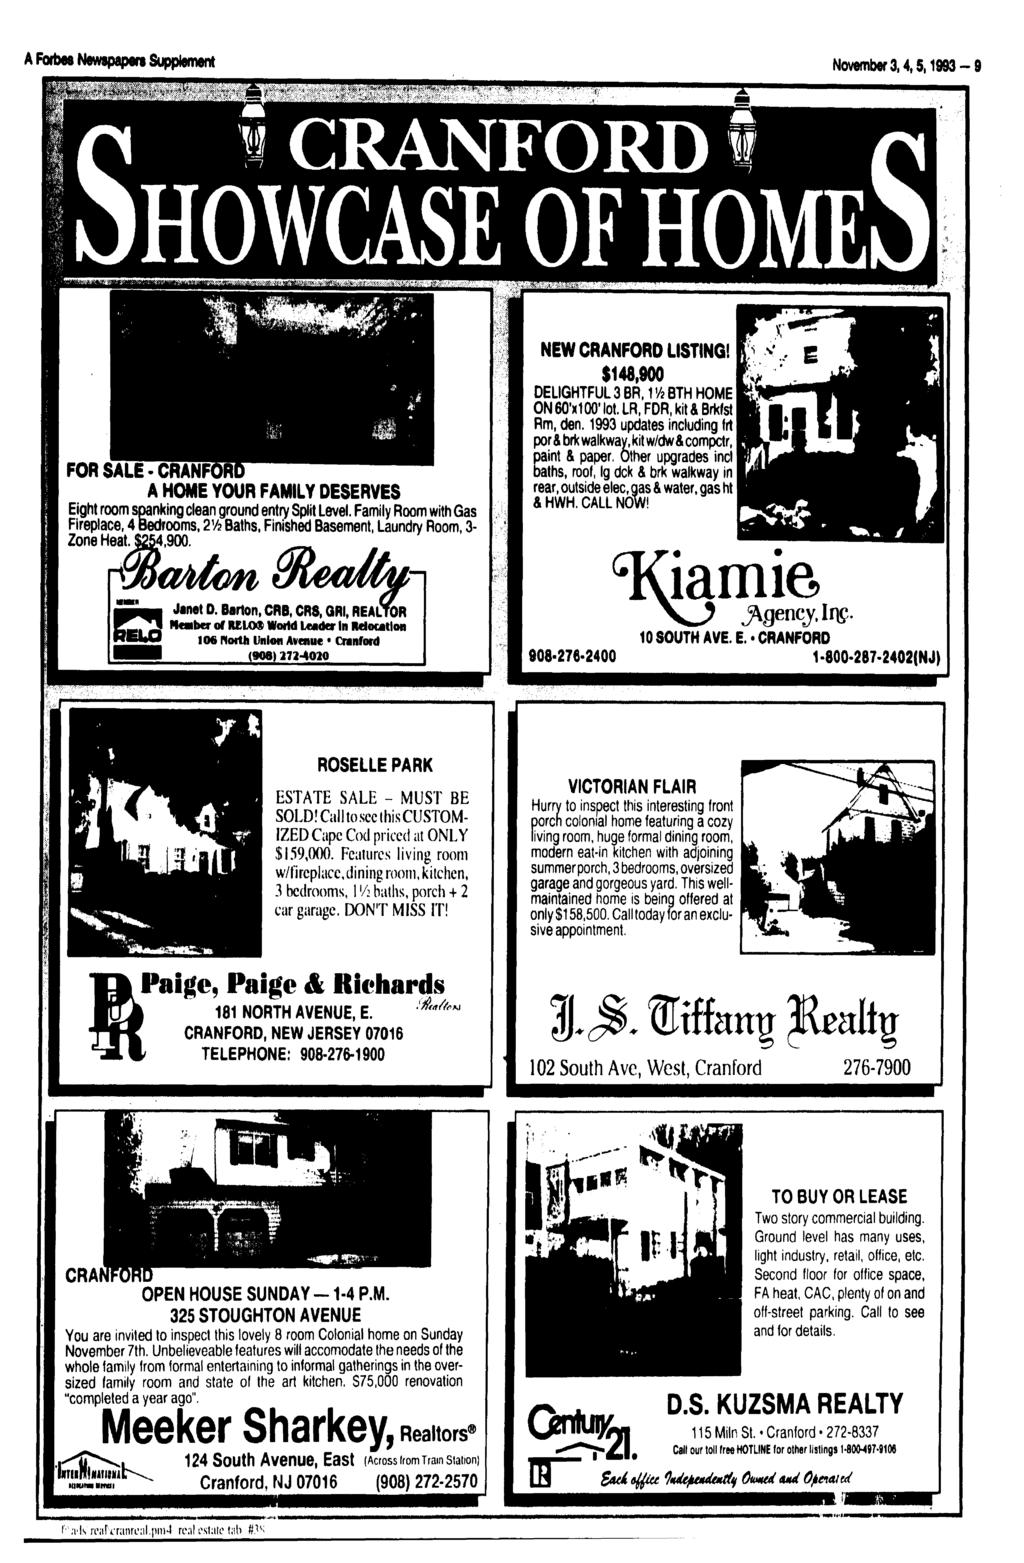 *, A Fates Newspapers Supplement November 3,4,5,1993-9 CRANFORD f aawfts 111 FOR SALE CRANH A HOME YOUR FAMILY DESERVES Eight room spanking clean ground entry Split Level.